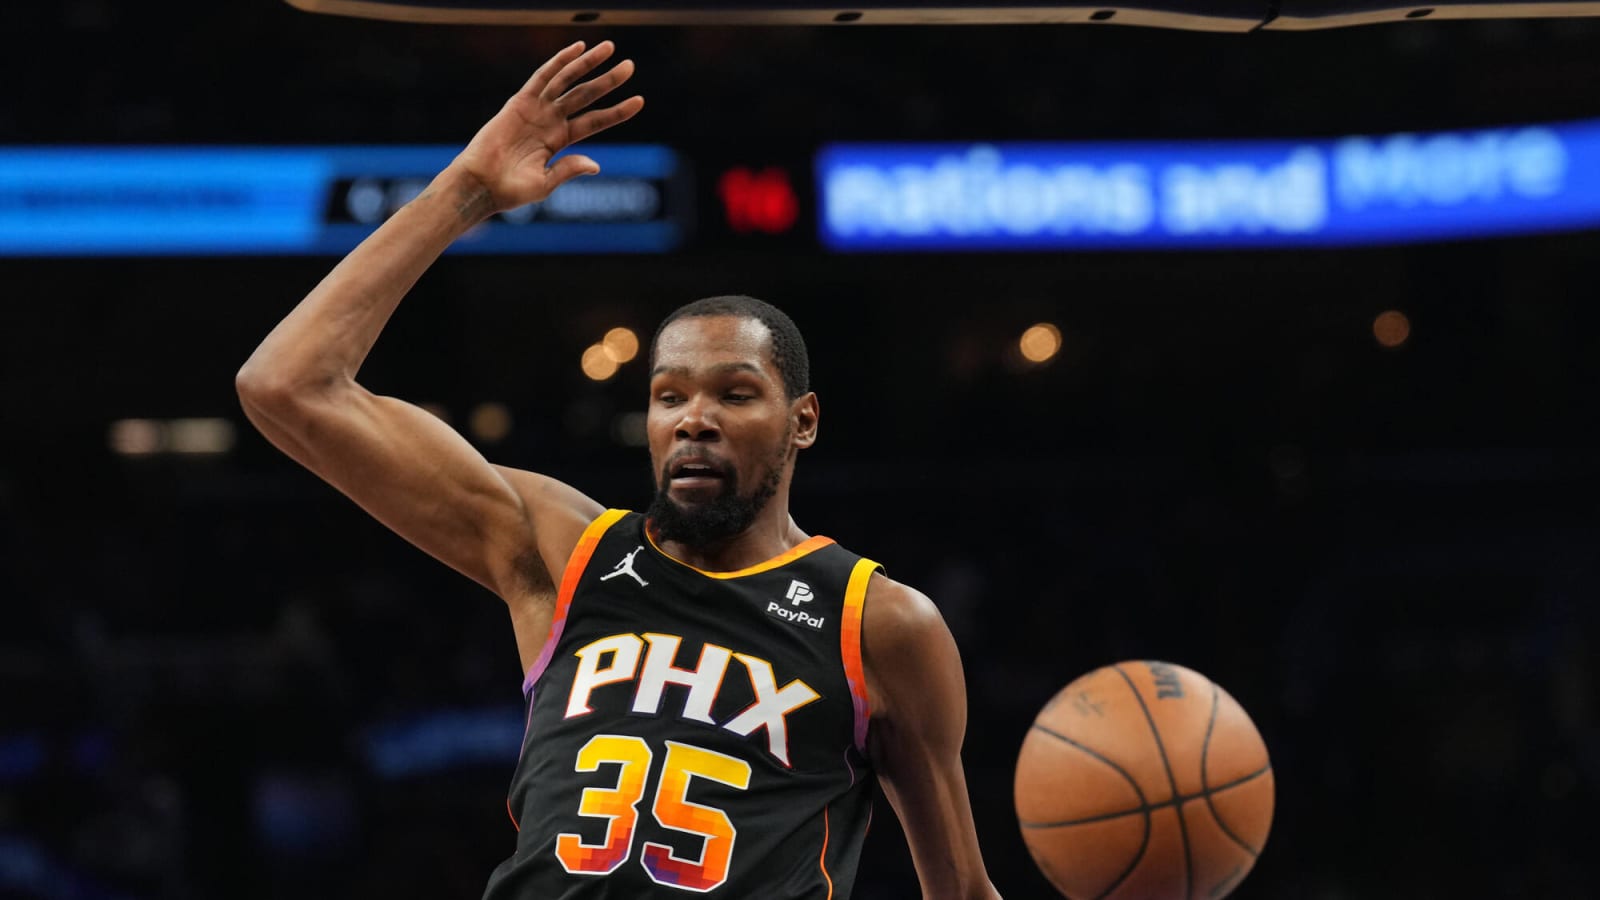 Just like in GS, BKLYN , KD shows no leadership in PHX